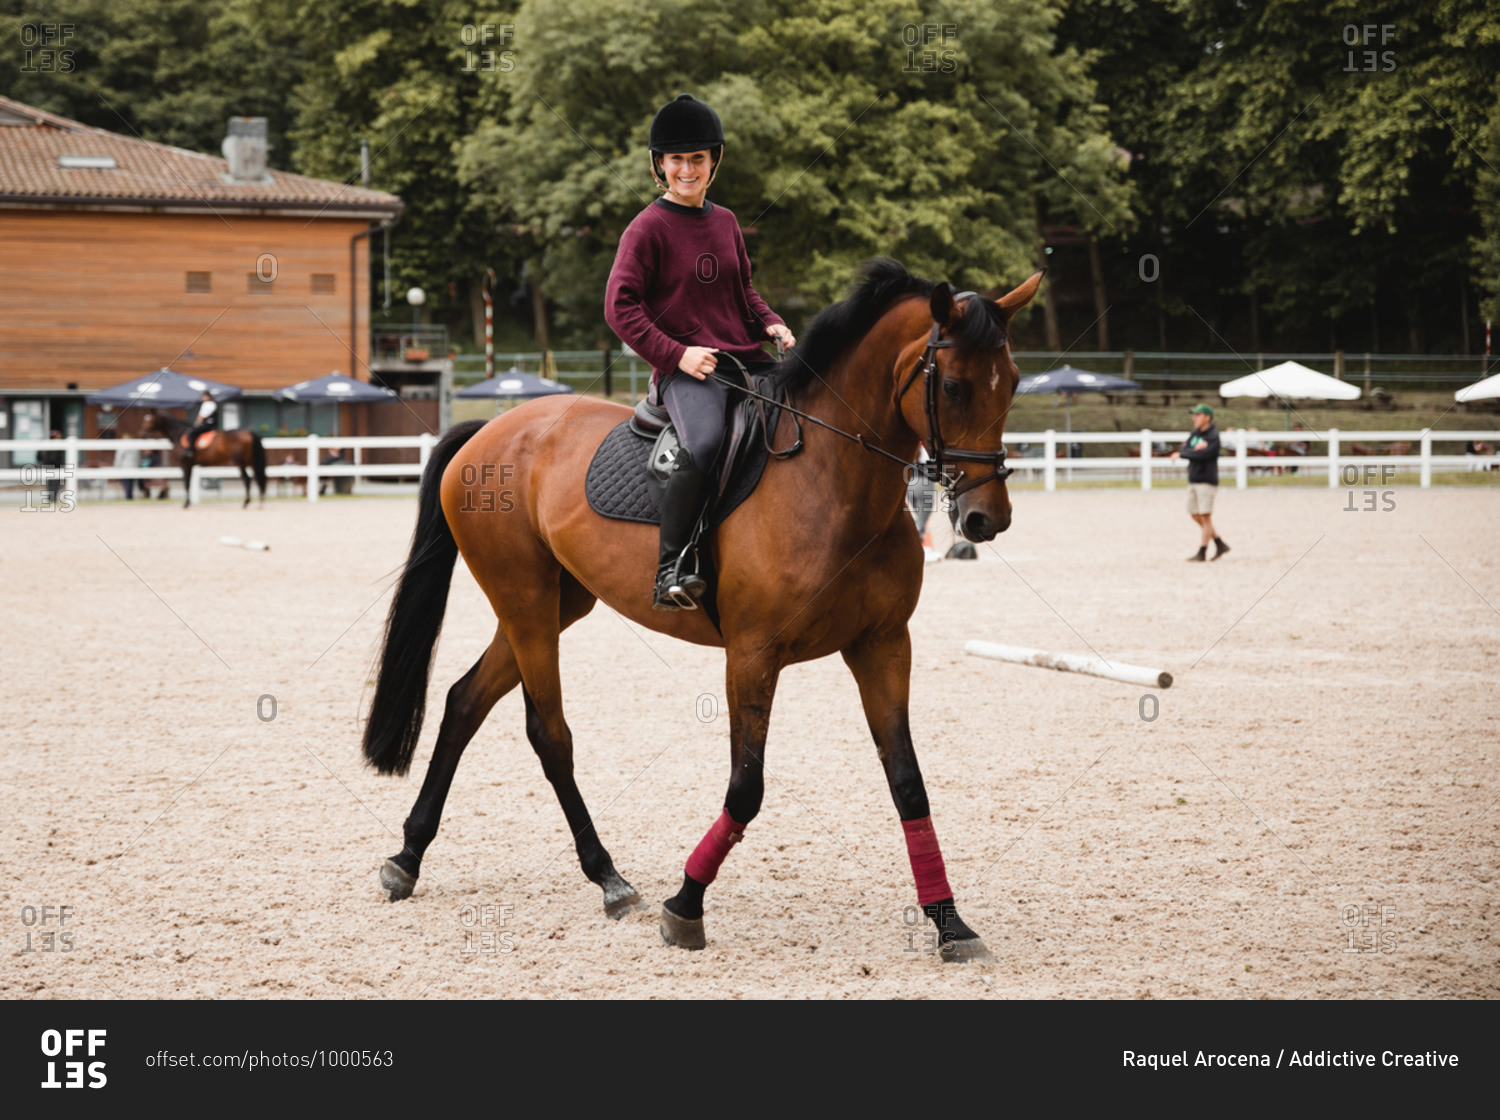 Smiley female equestrian in uniform riding chestnut horse on\
sand arena during dressage looking at camera stock photo -\
OFFSET